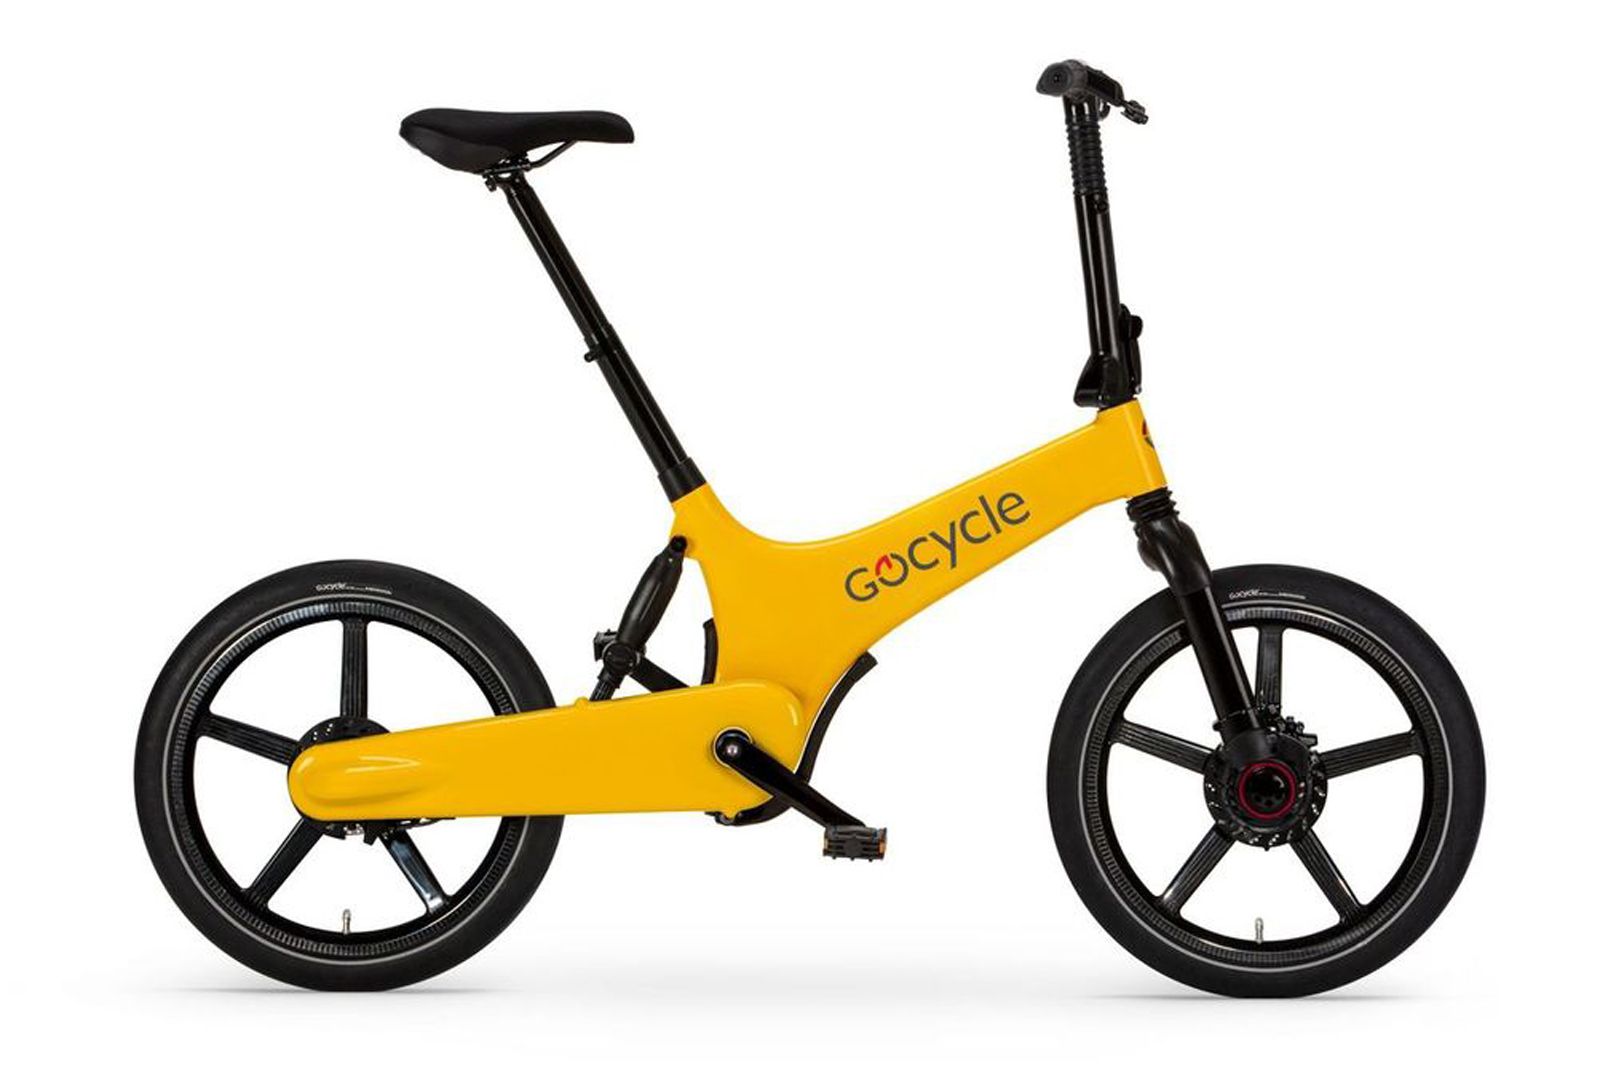 Gocycle has a special edition G3+ electric bike - but there are only 300 available photo 1